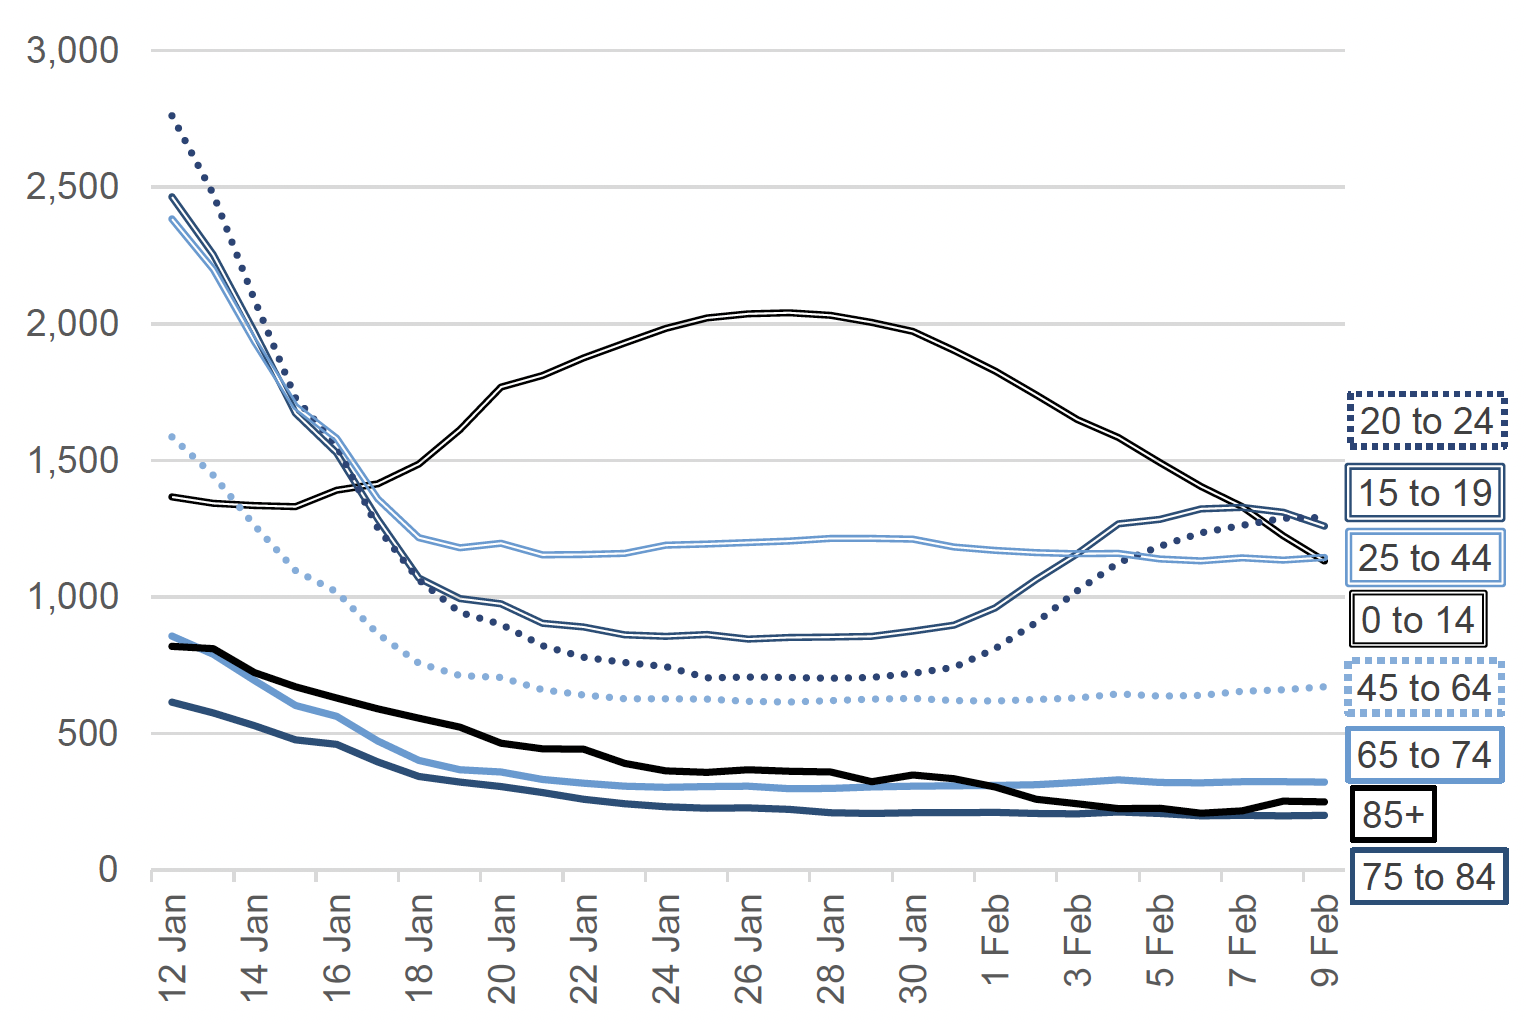 a line graph showing the weekly total PCR and LFD cases (by reporting date) per 100,000 people in Scotland by age group, from 12 January 2022 to 9 February 2022 (inclusively). 